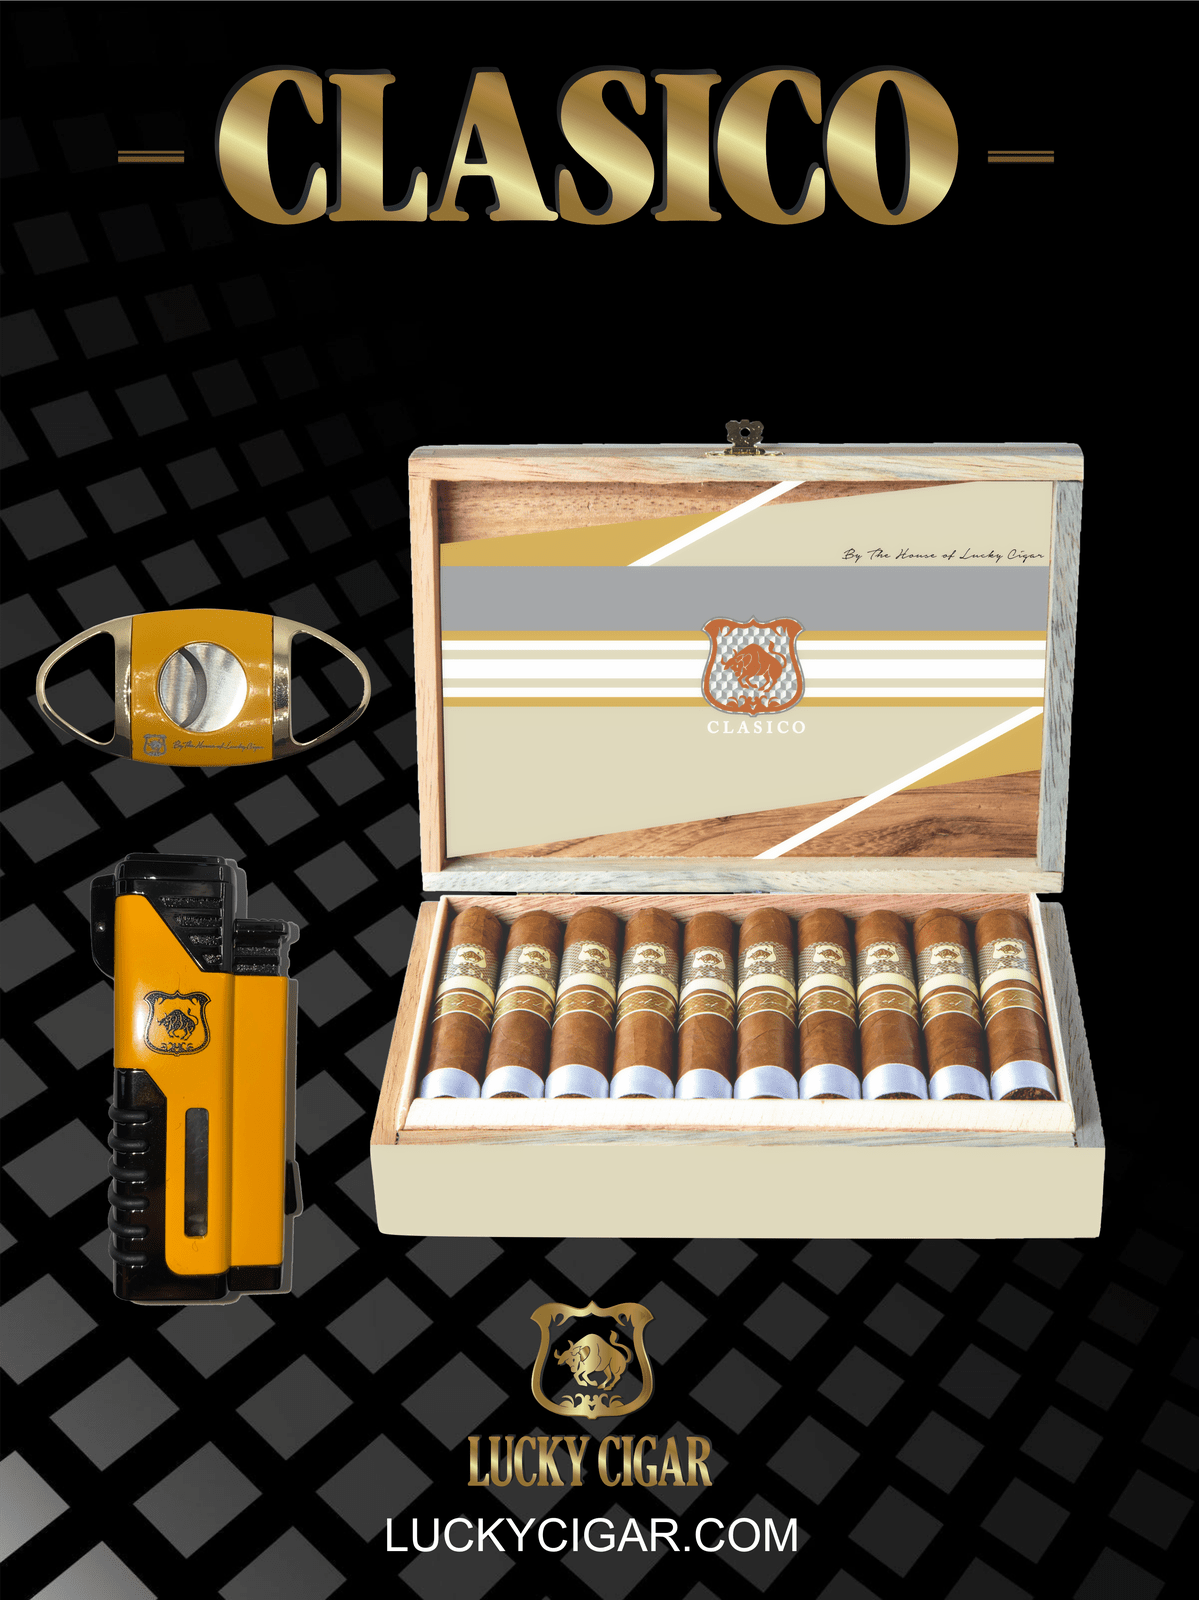 Classic Cigars - Classico by Lucky Cigar: Set of Rotchilde 4 1/2x50 Box of 20 with Cutter, Torch